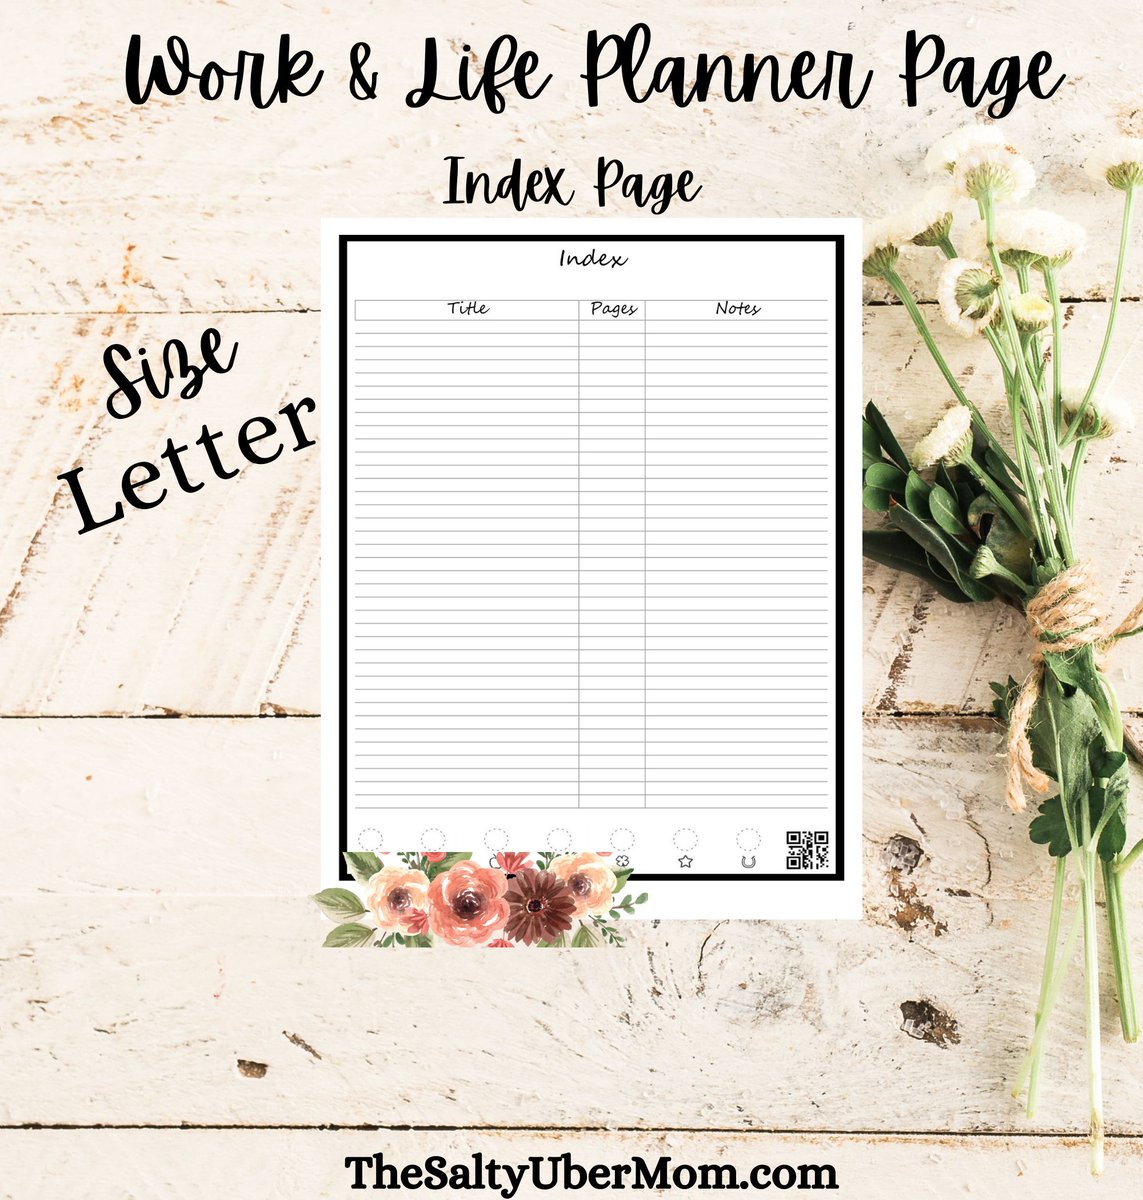 Who doesn't need a simple Index Page? This digital download is perfect for all of your journals. You can use the Rocketbook app to scan and upload this page. #digitaldownload #indexpage #journal #planner #plannerpages #customplanner buff.ly/4coDWZ9